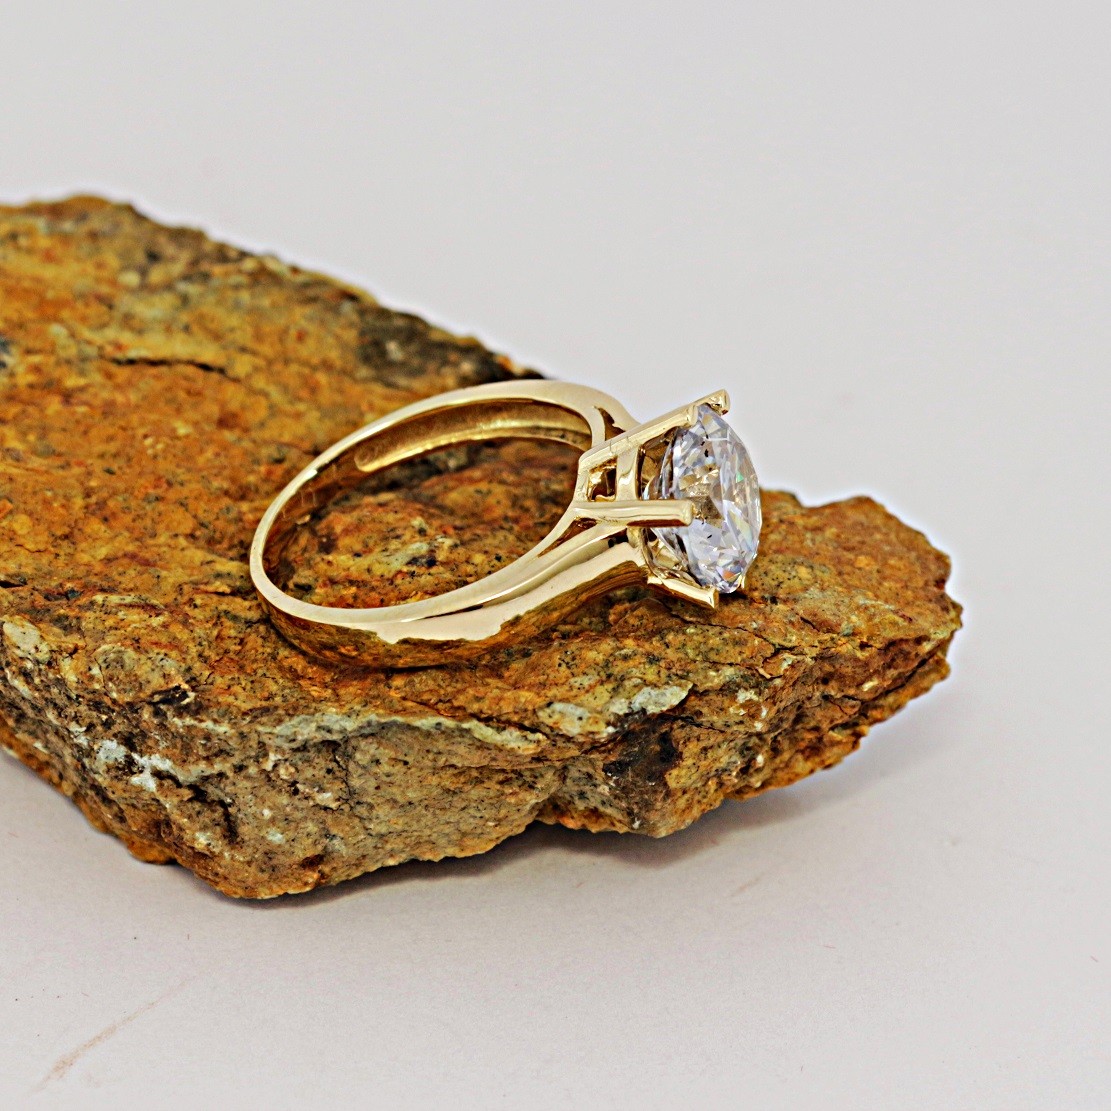  Gold Solitaire Ring